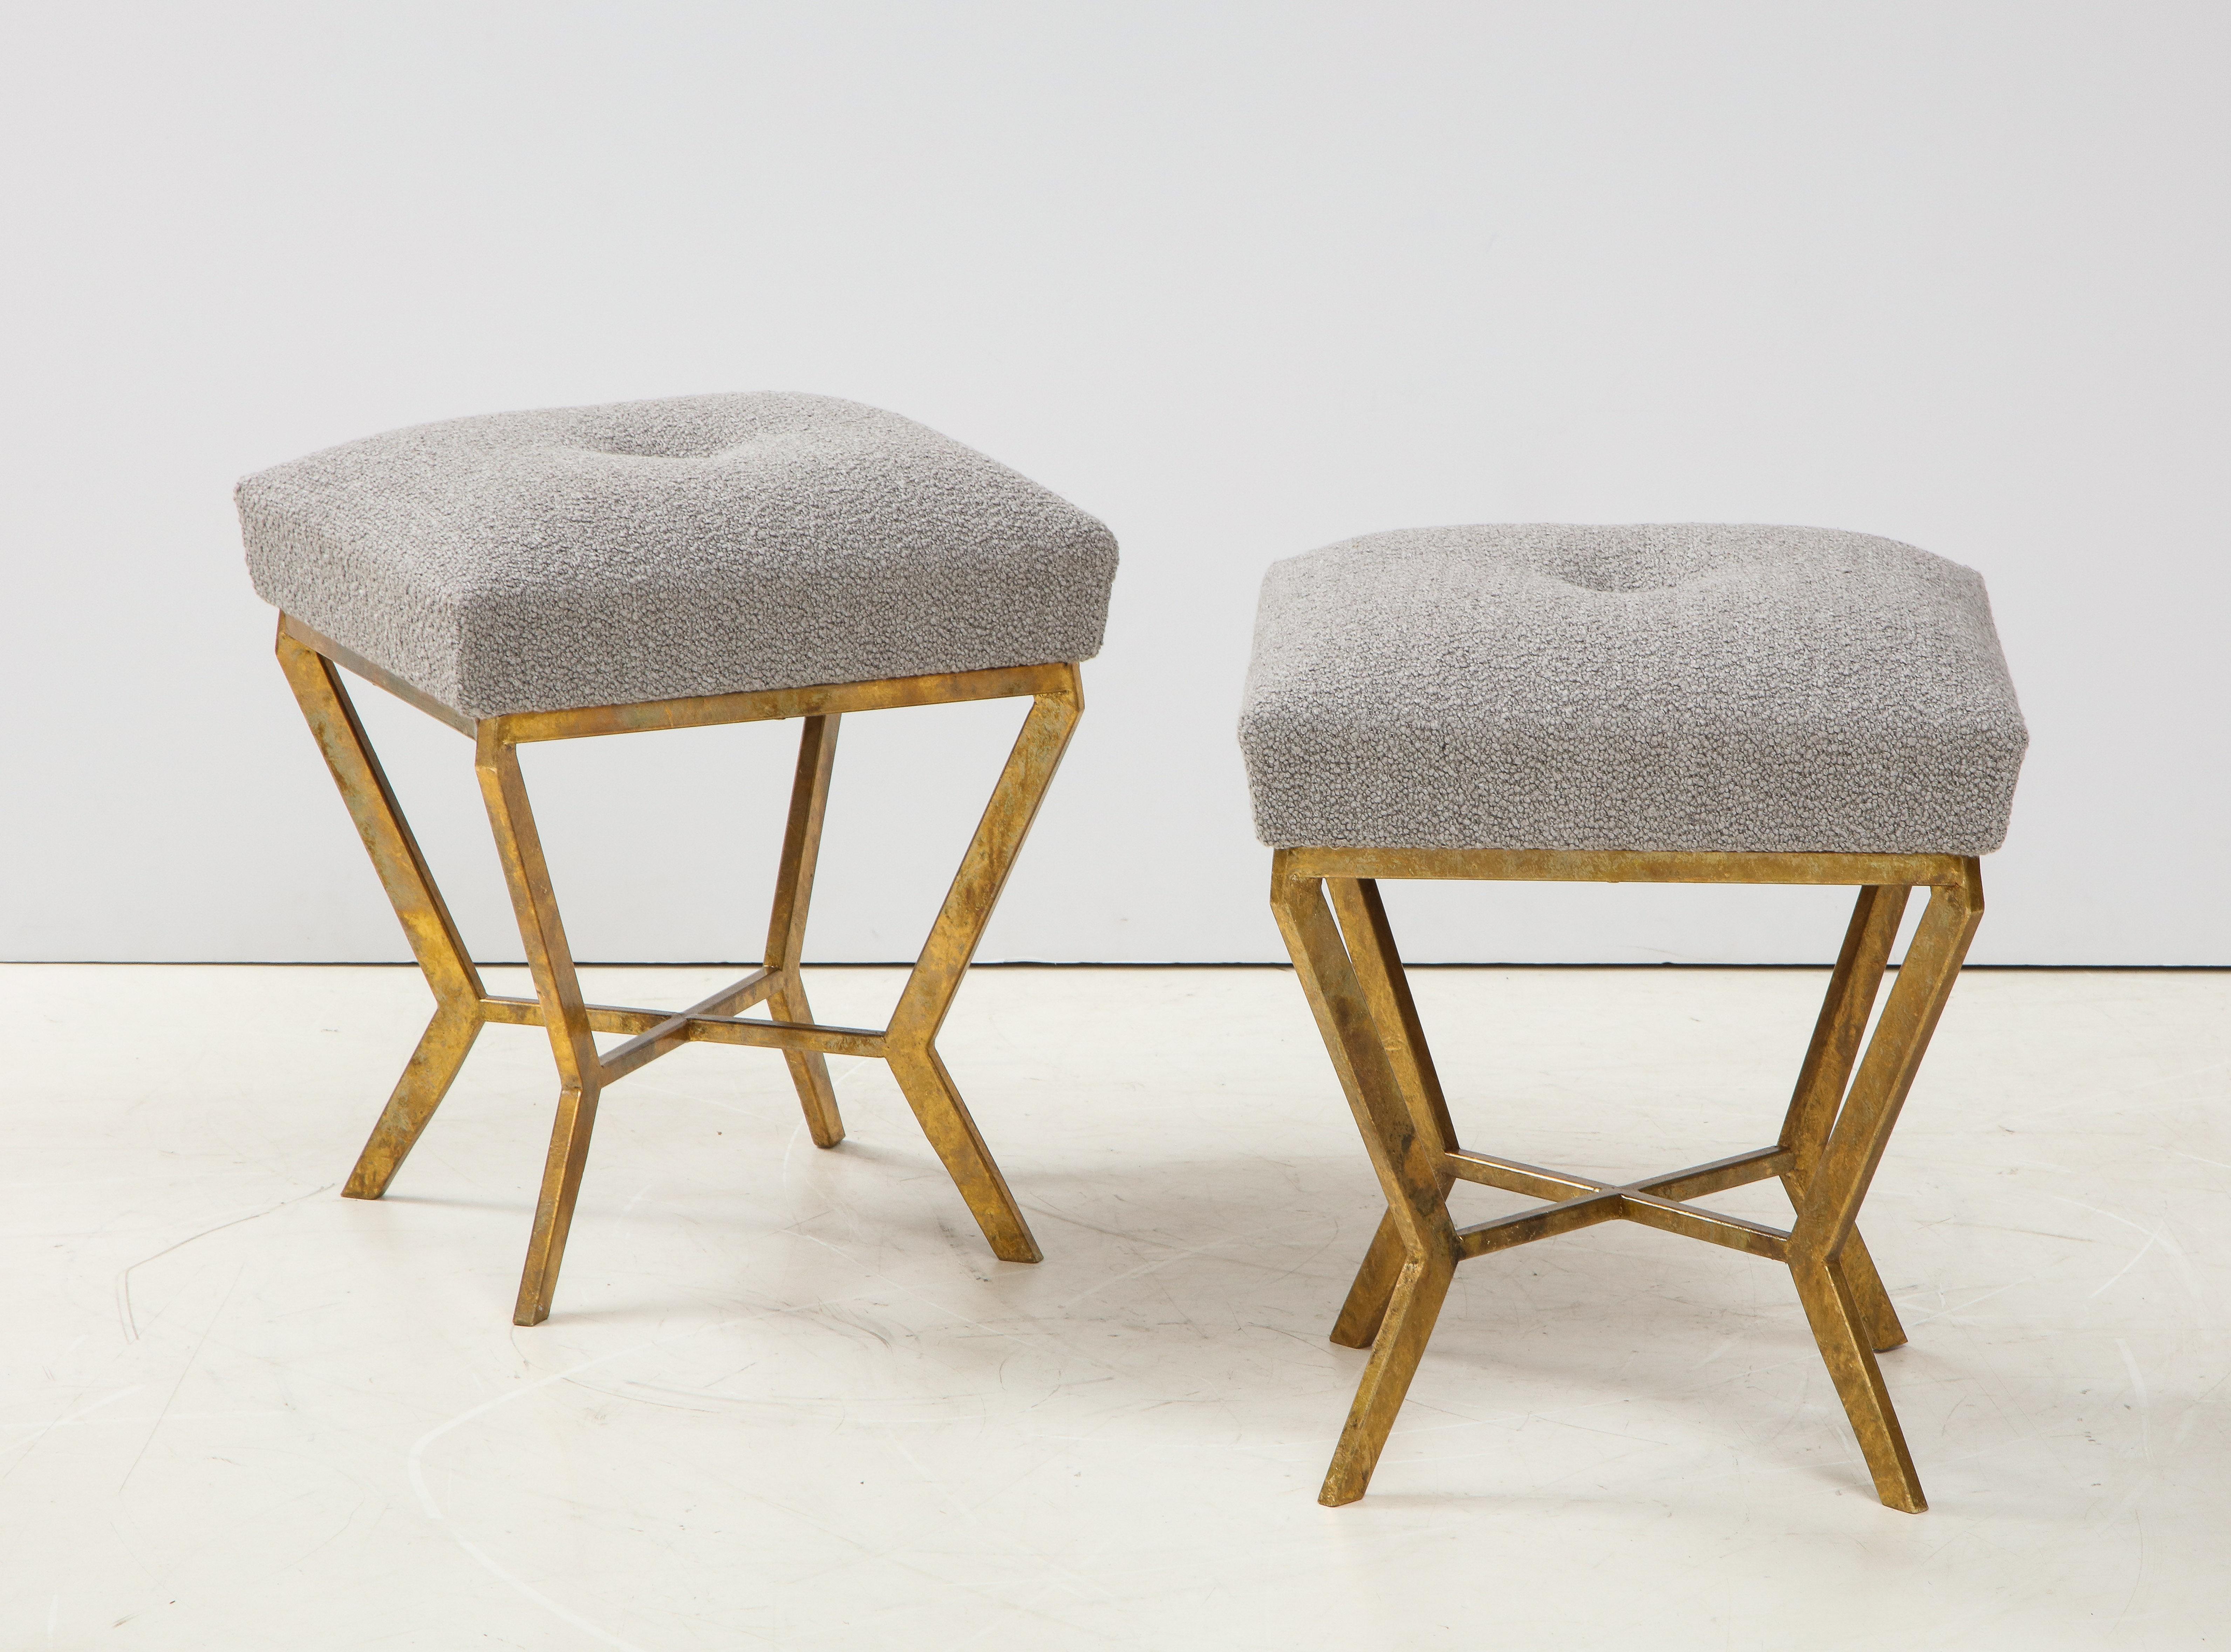 Gilt Pair of Gilded Gold Leaf Iron Stools with Tufted Grey Boucle, Italy, 2021